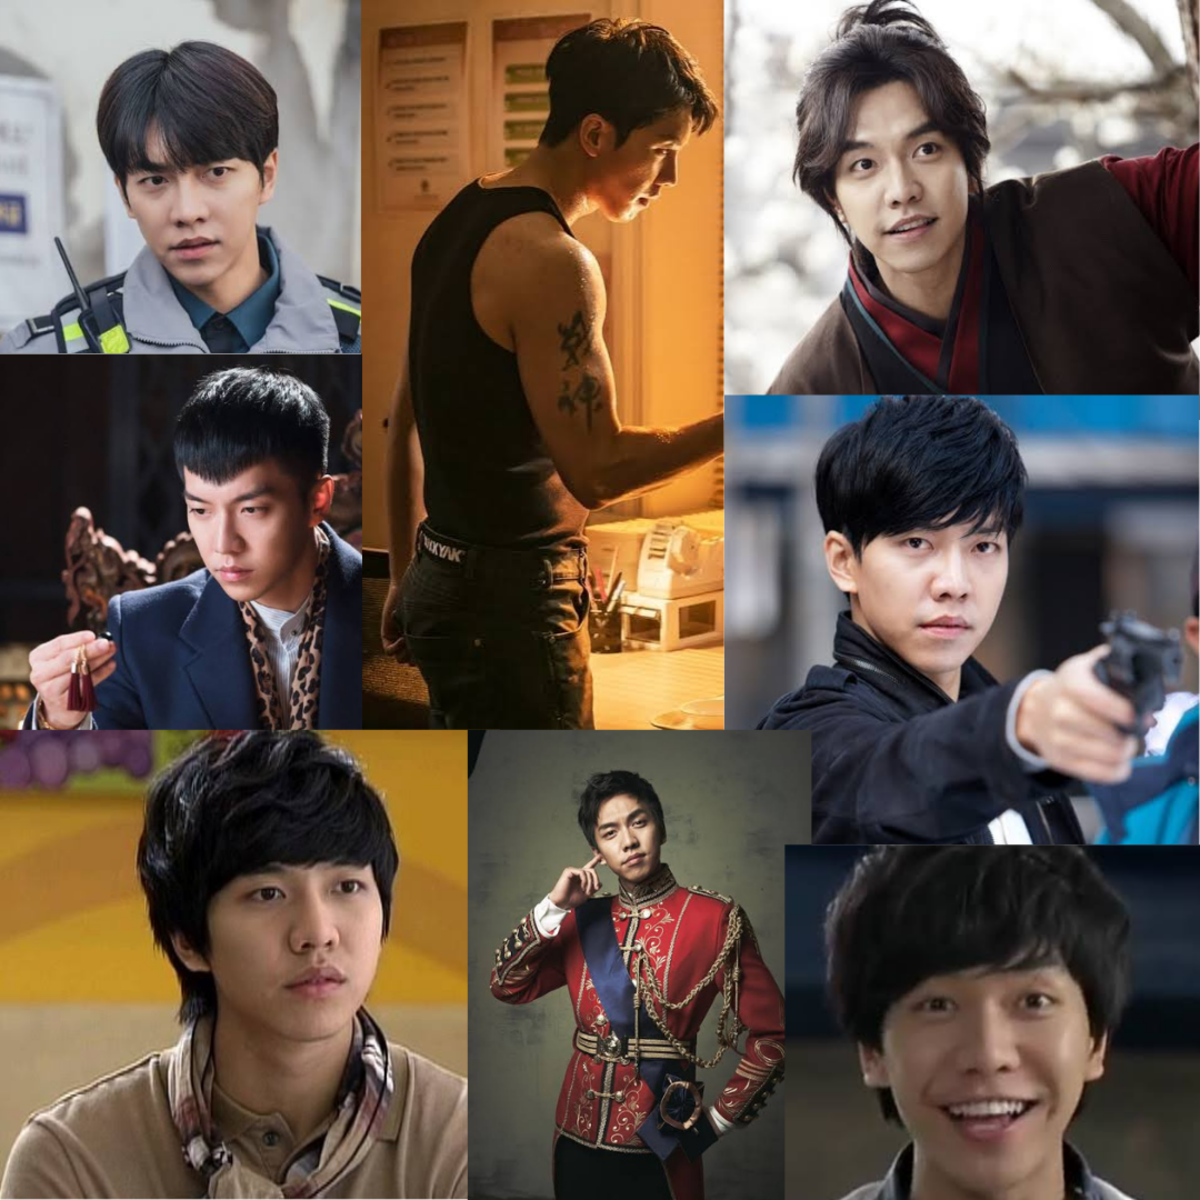 Lee Seung-gi is a South Korean singer, actor, host, and entertainer.